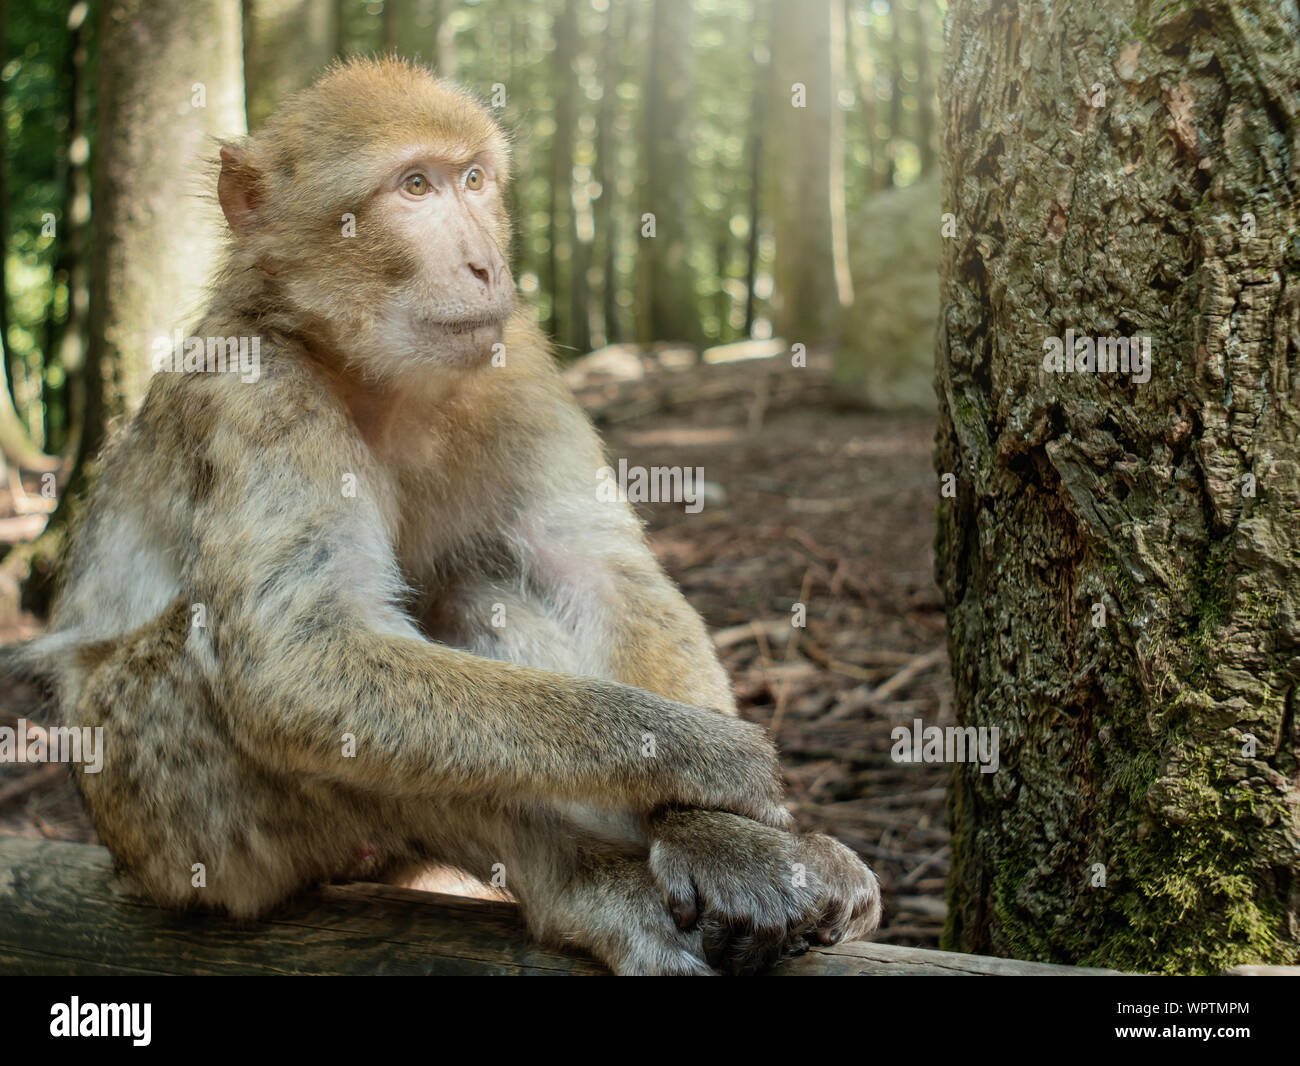 Portrait of sitting Berber monkey in the forest Stock Photo